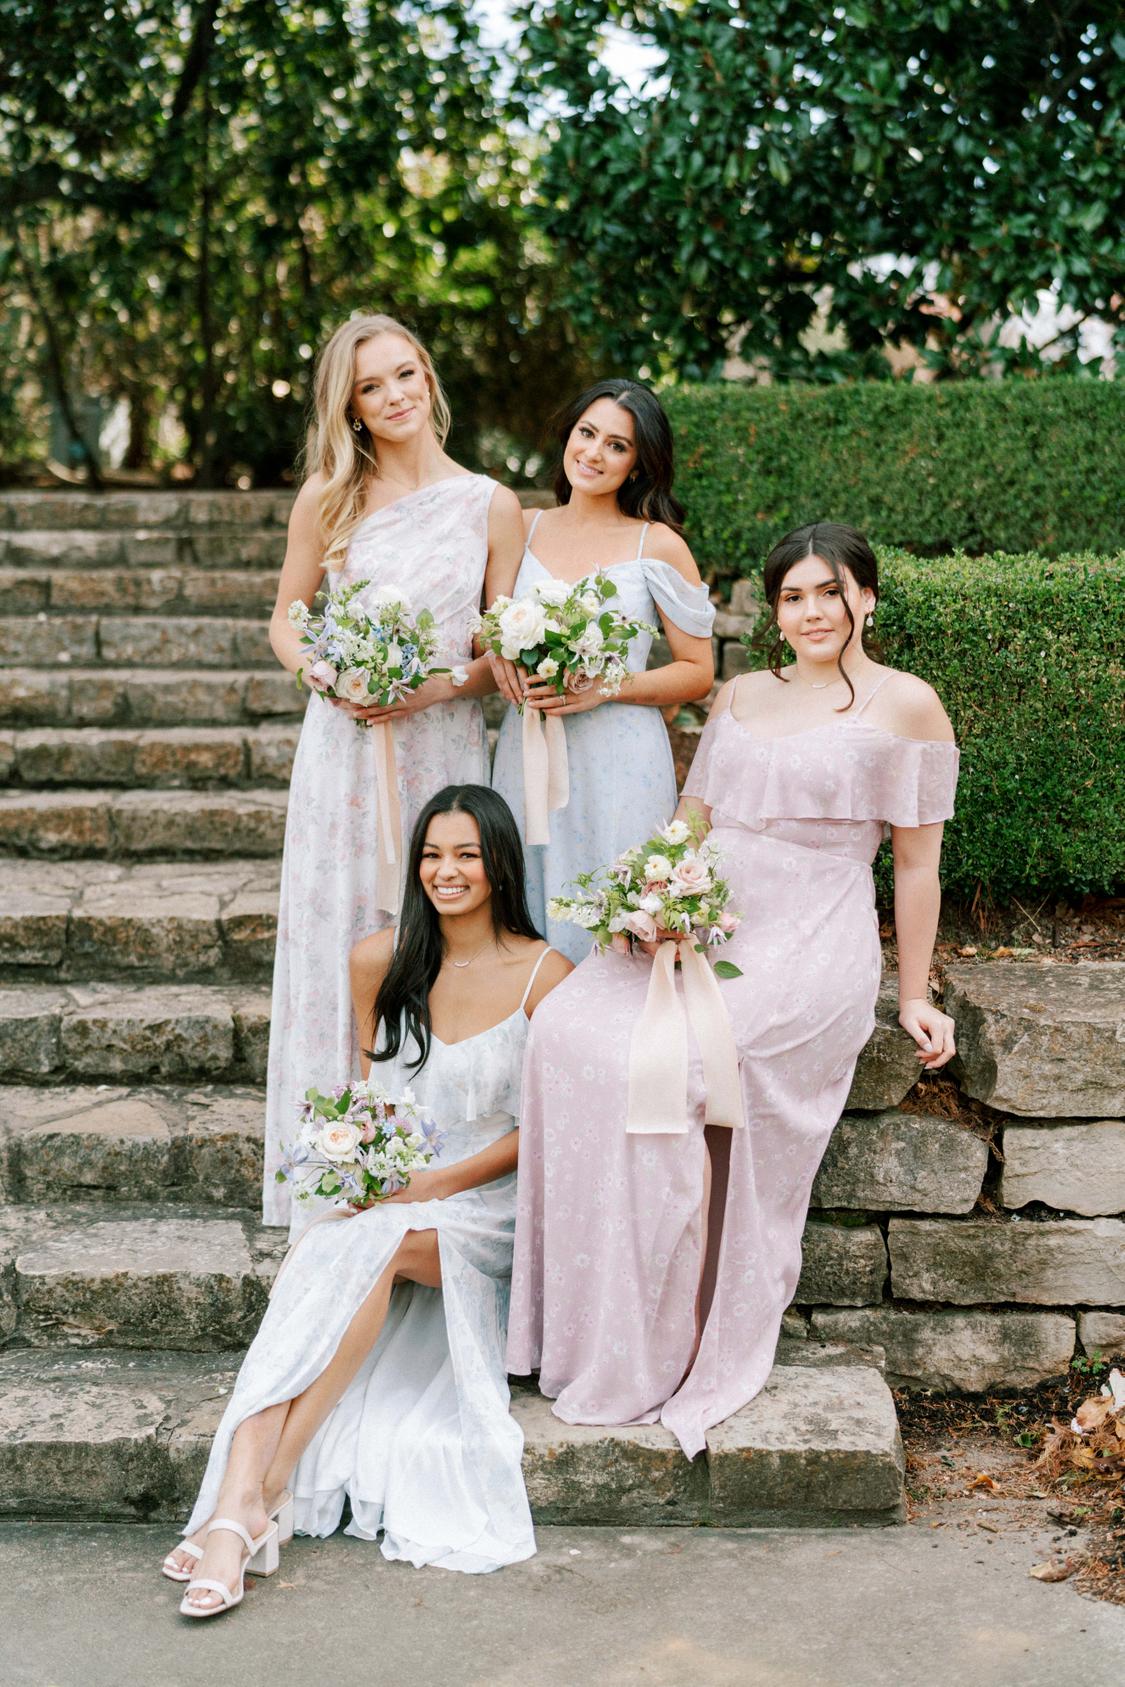 Introducing Our Brand New Line of Floral Bridesmaid Dresses, in  Collaboration With Birdy Grey! — Birdy Grey x Style Me Pretty